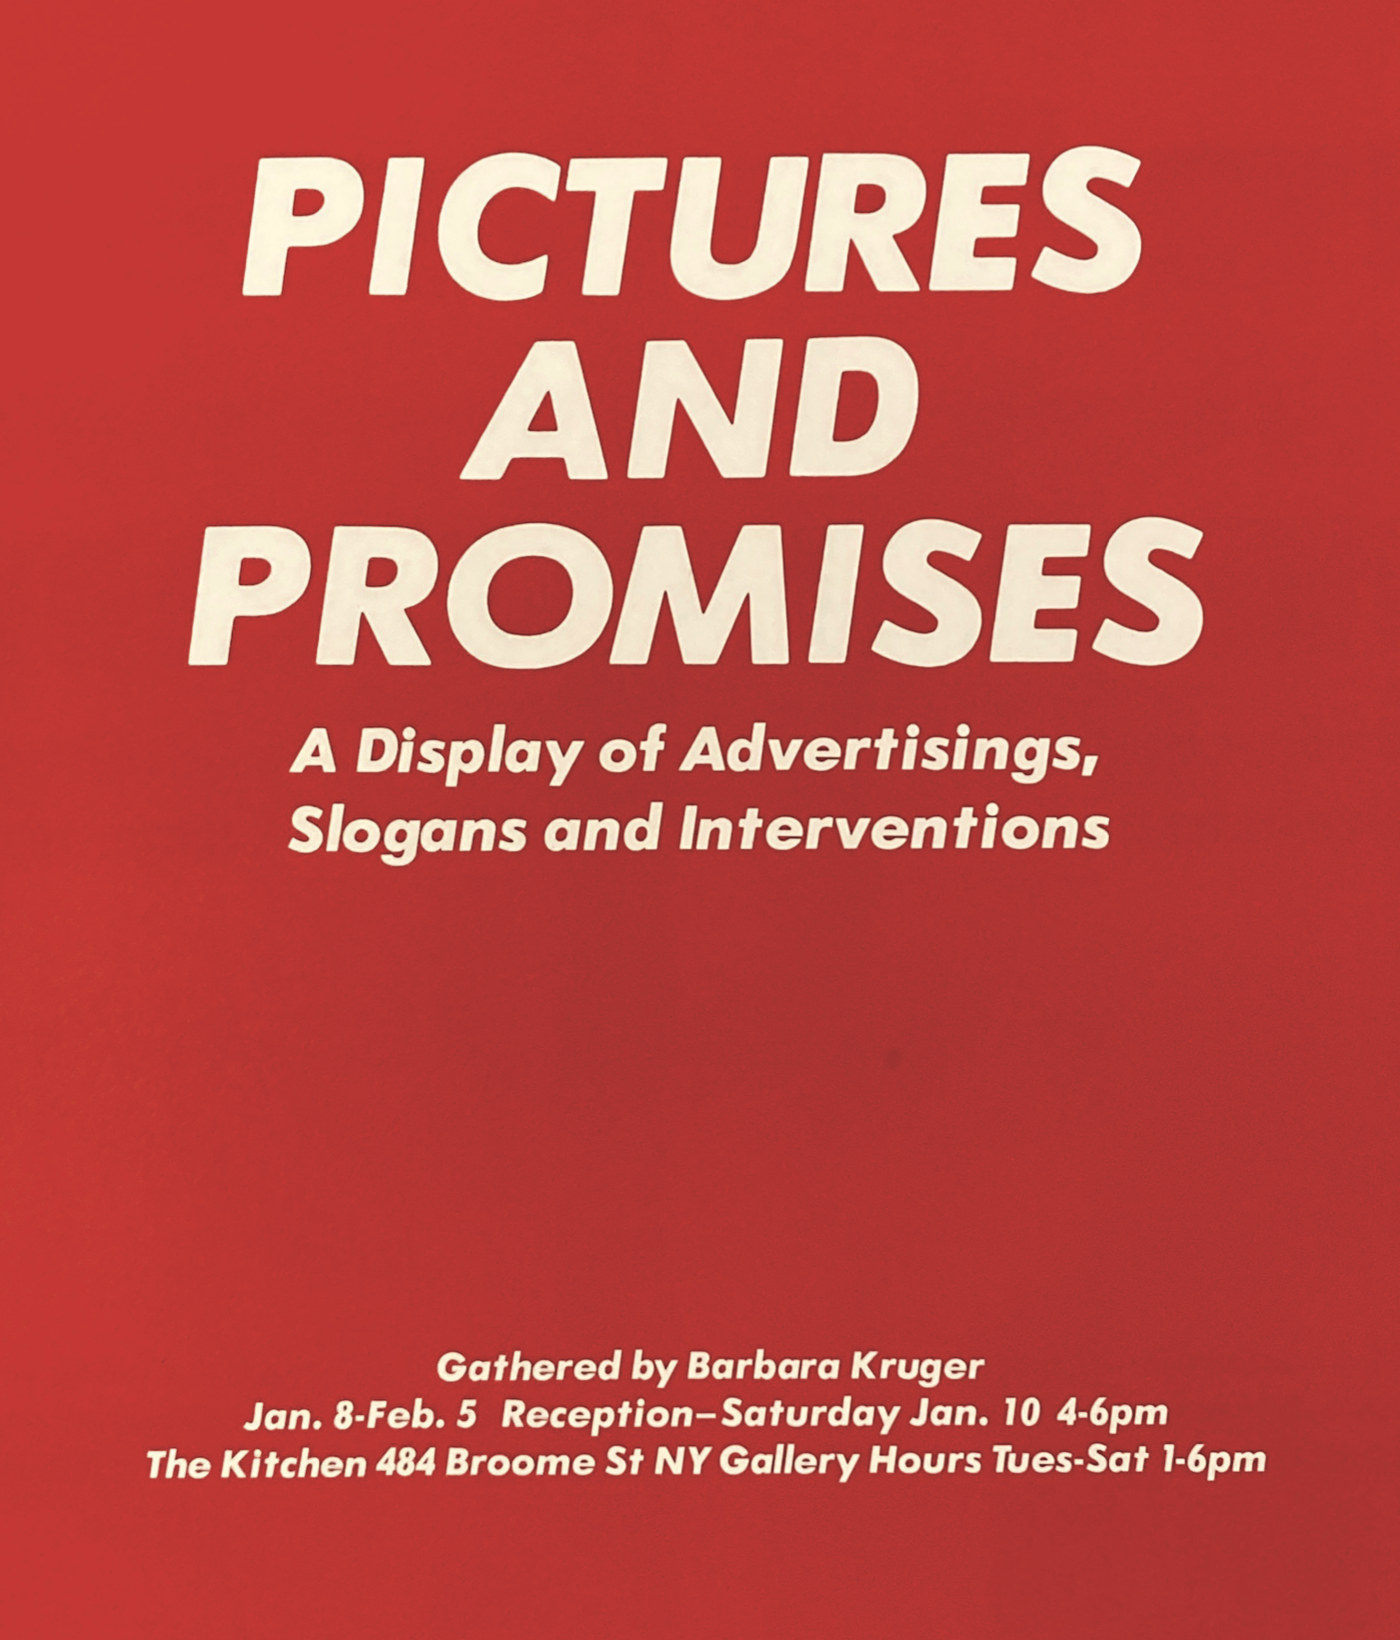 Pictures and Promises: A Display of Advertisings, Slogans and Interventions, January 8 - February 5, 1981. Barbara Kruger. Poster, 20 x 17 in. 